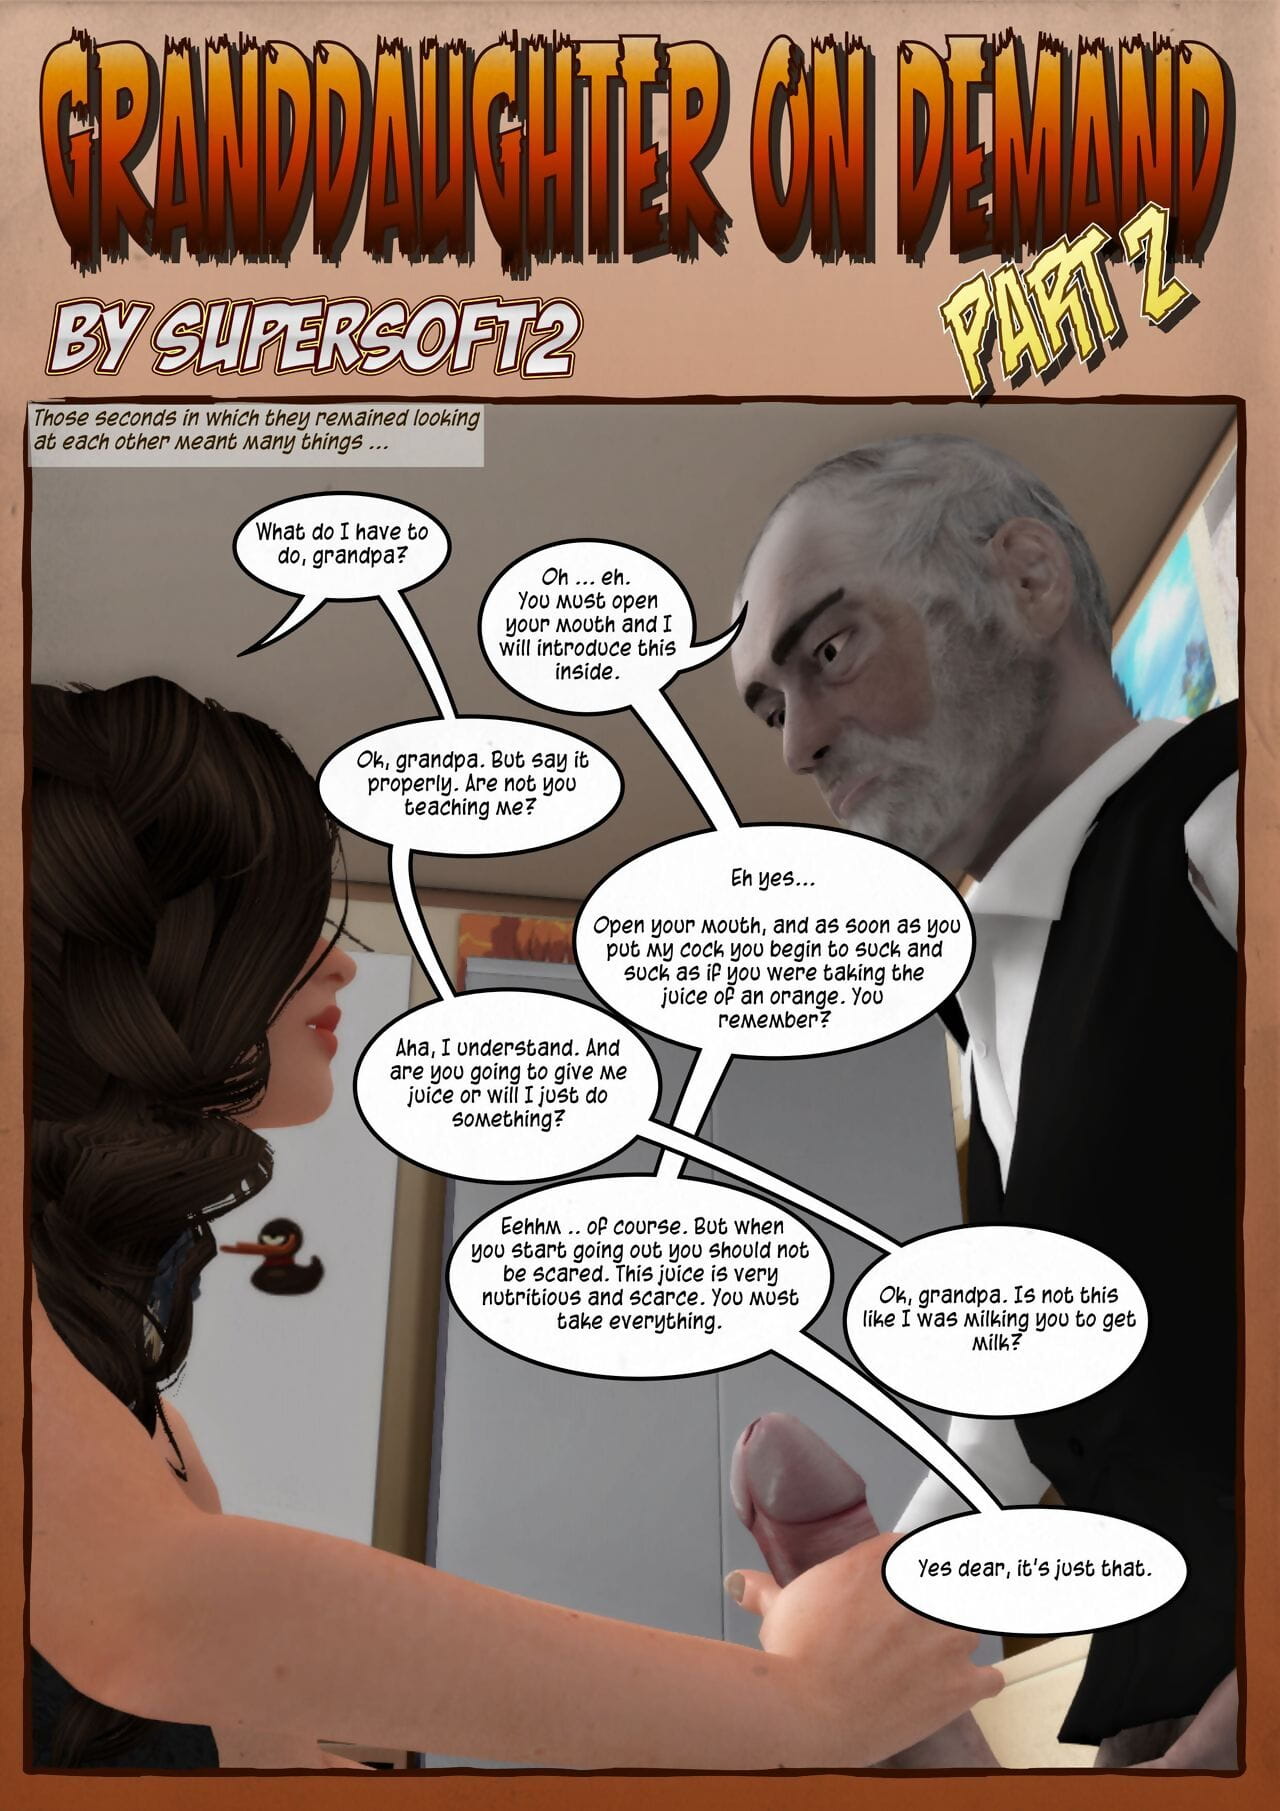 Granddaughter on demand PART 2 page 1